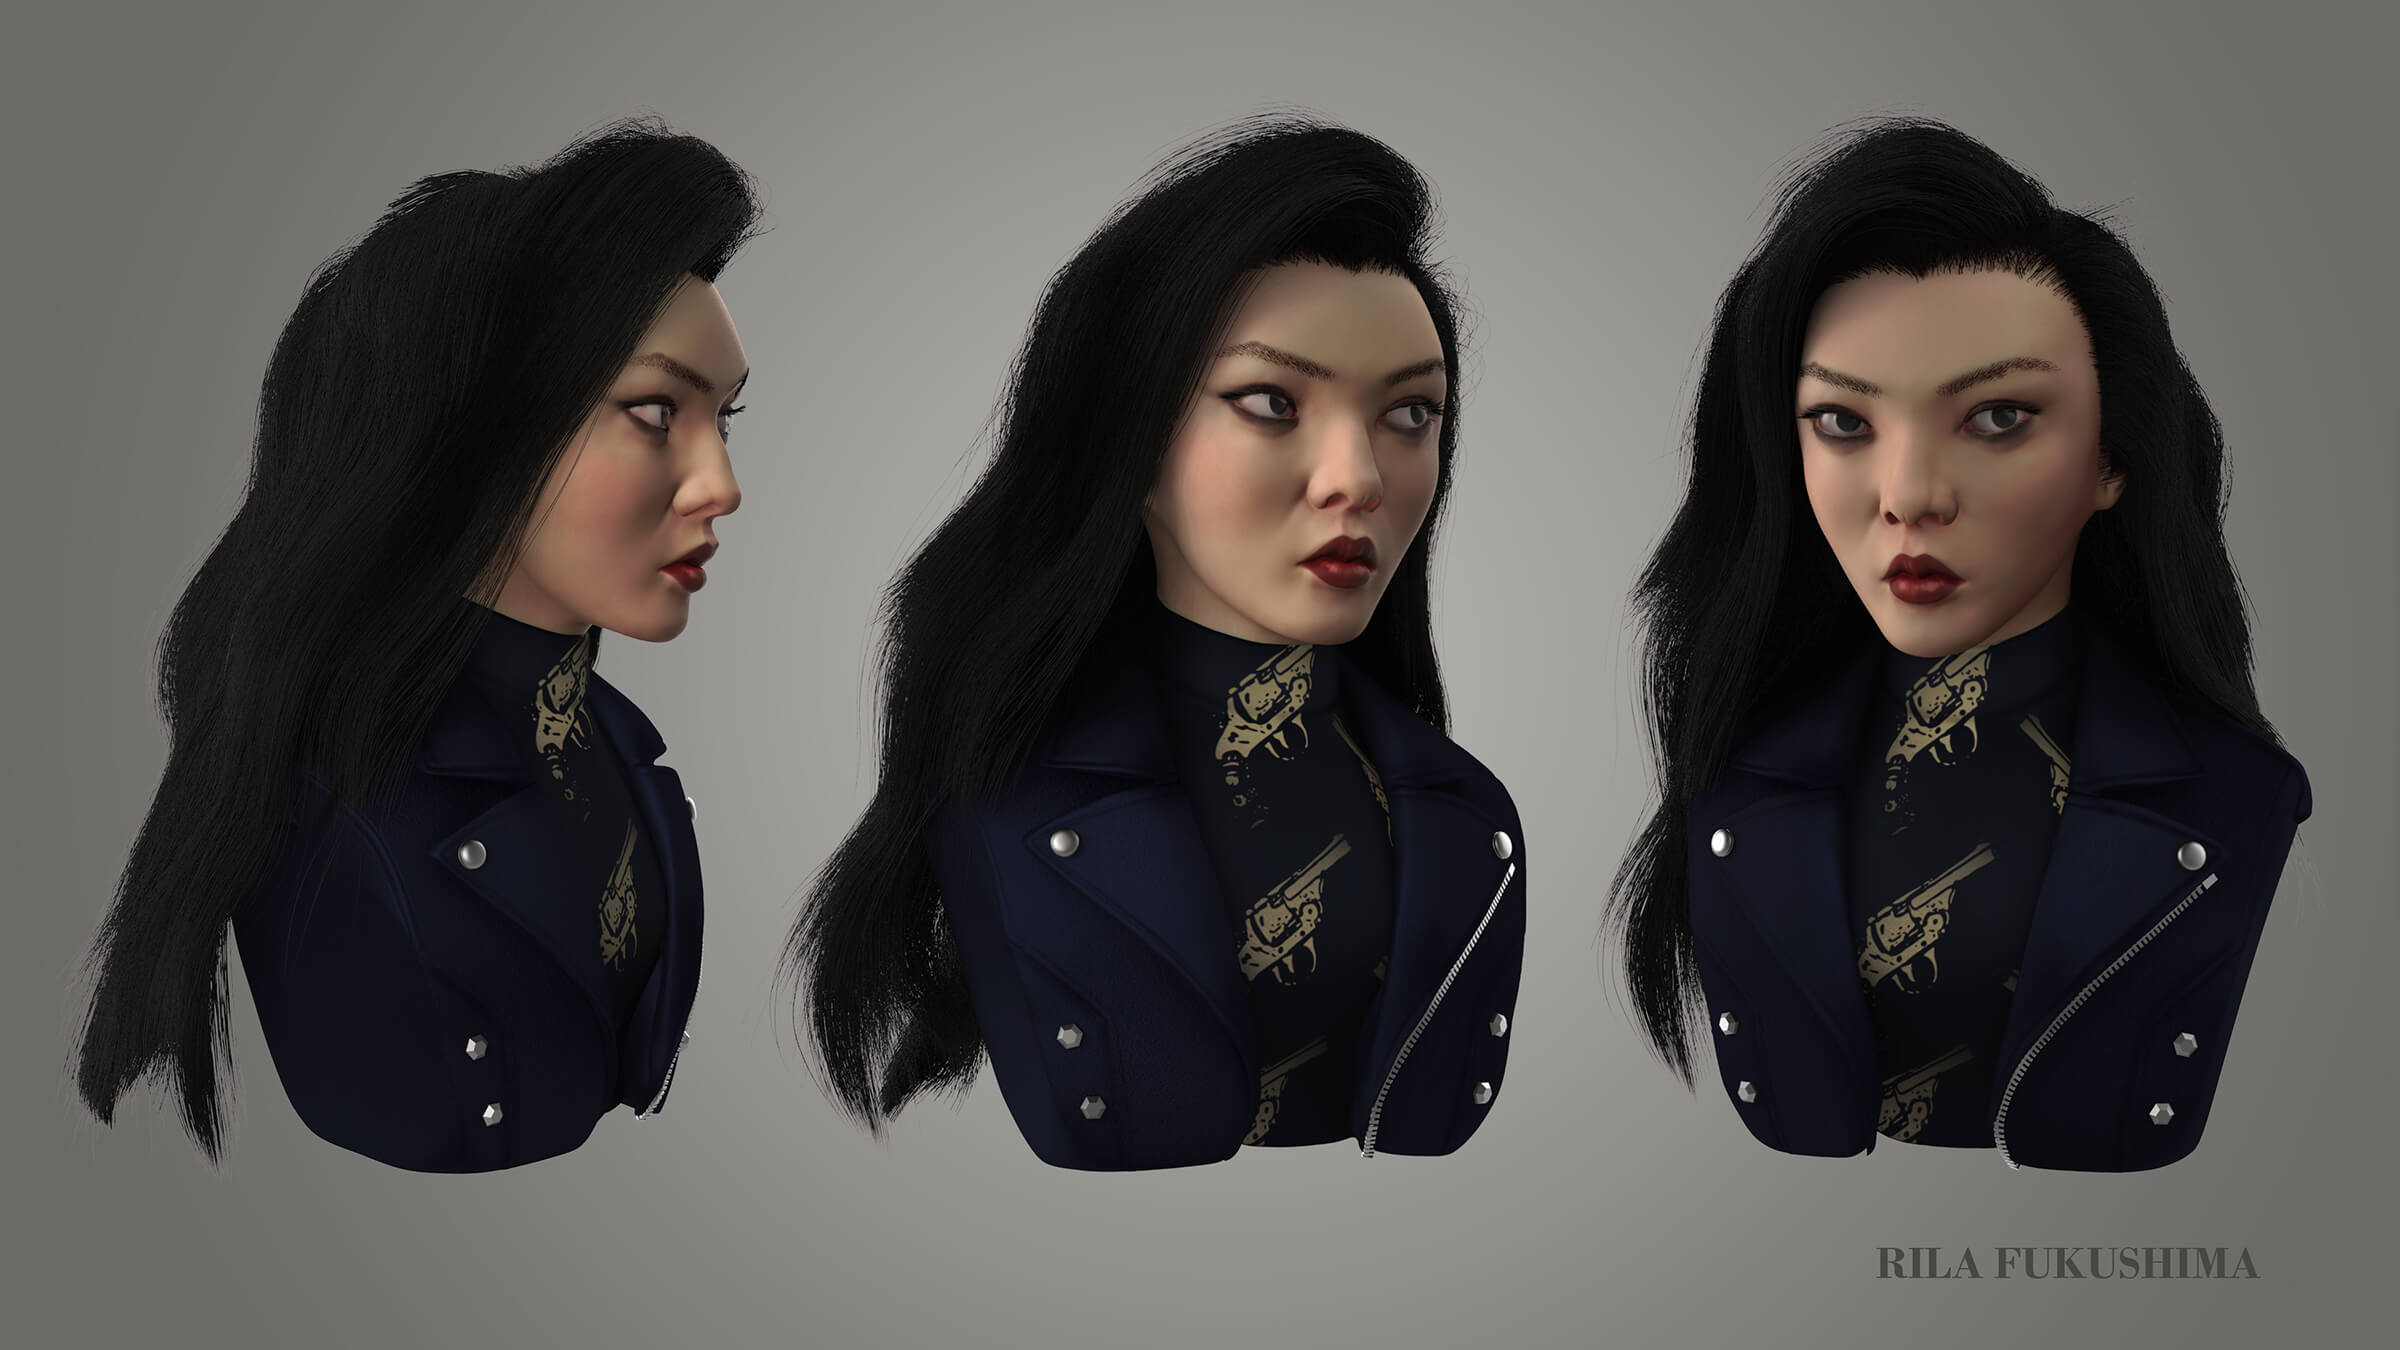 Multiple angles of a dark-haired woman wearing a turtleneck and jacket